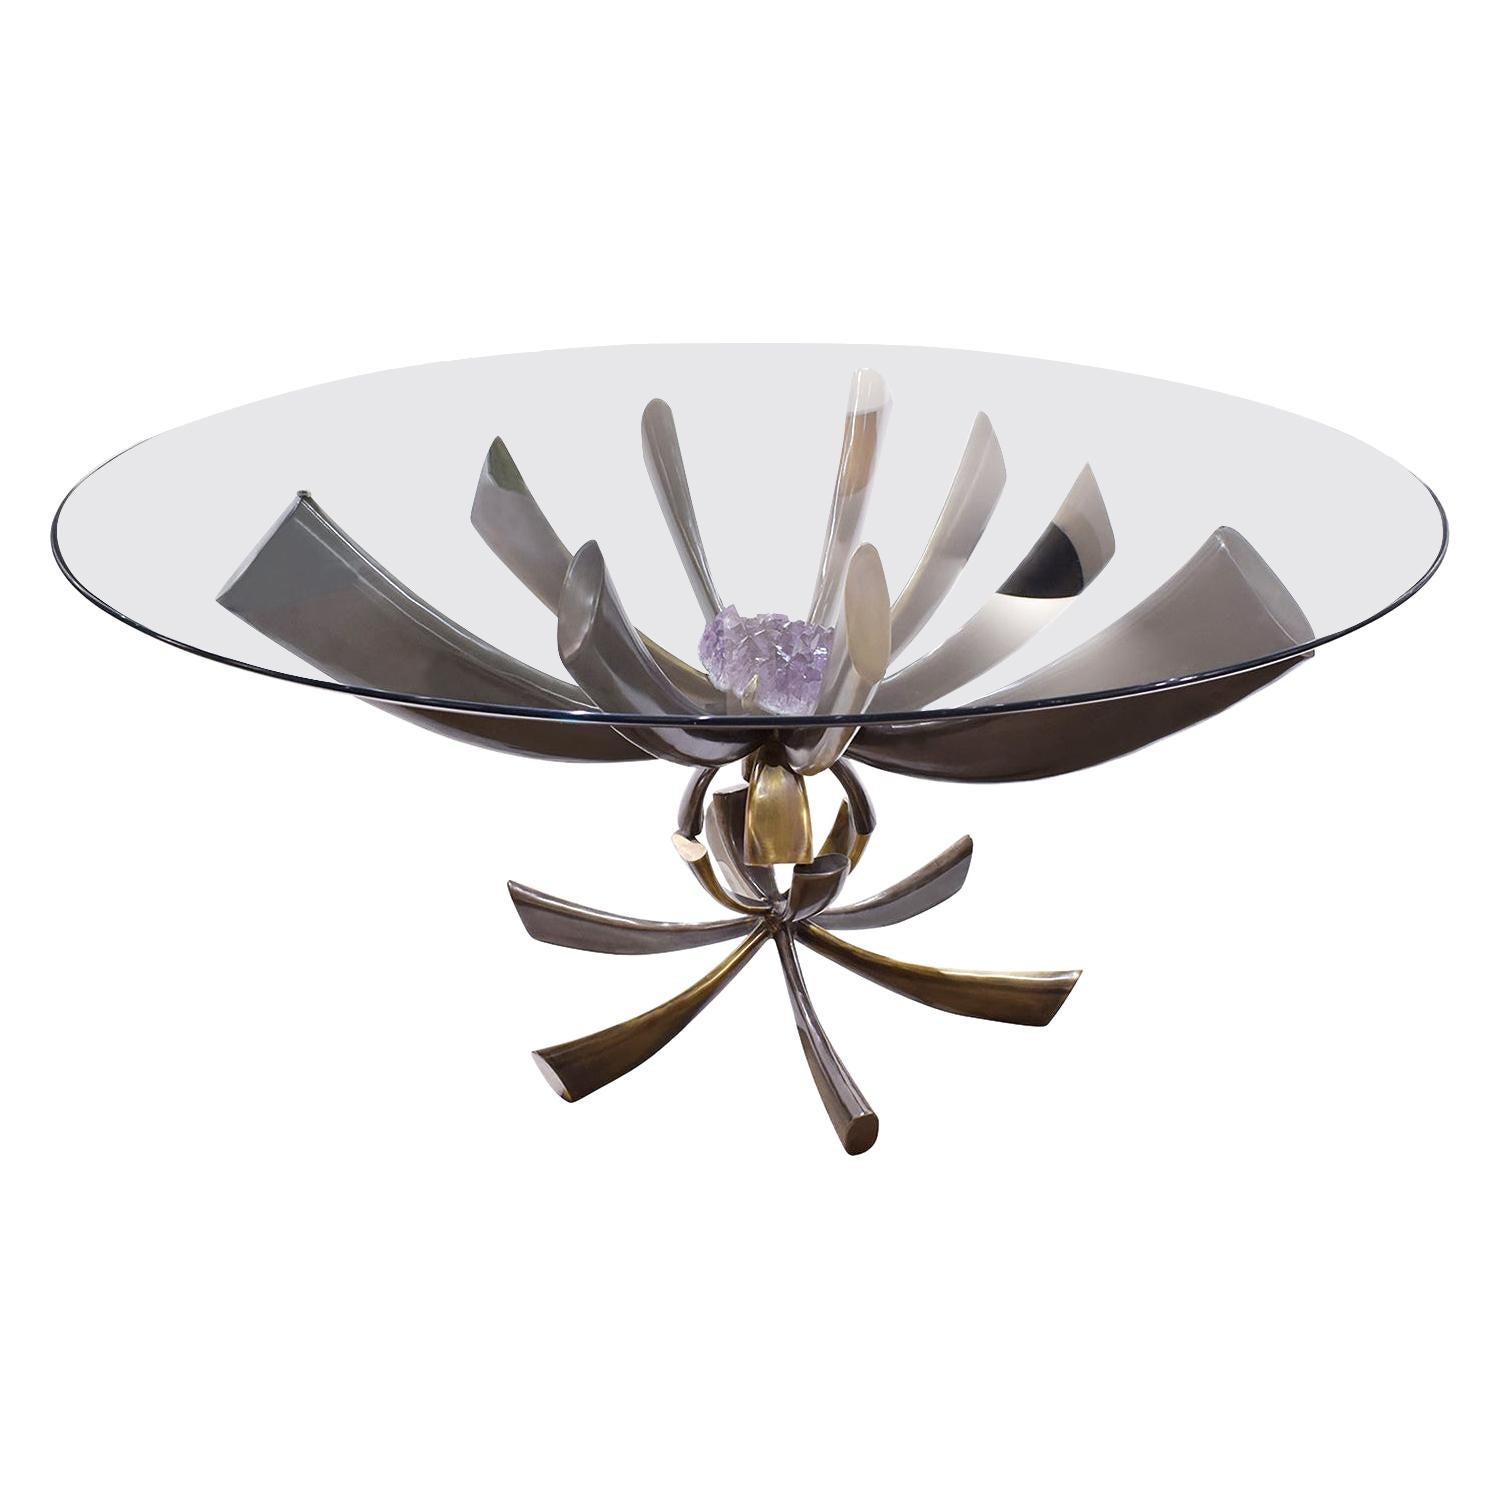 Jacques Duval-Brasseur Rare Table in Bronze with Mounted Amethyst 1970s 'Signed'